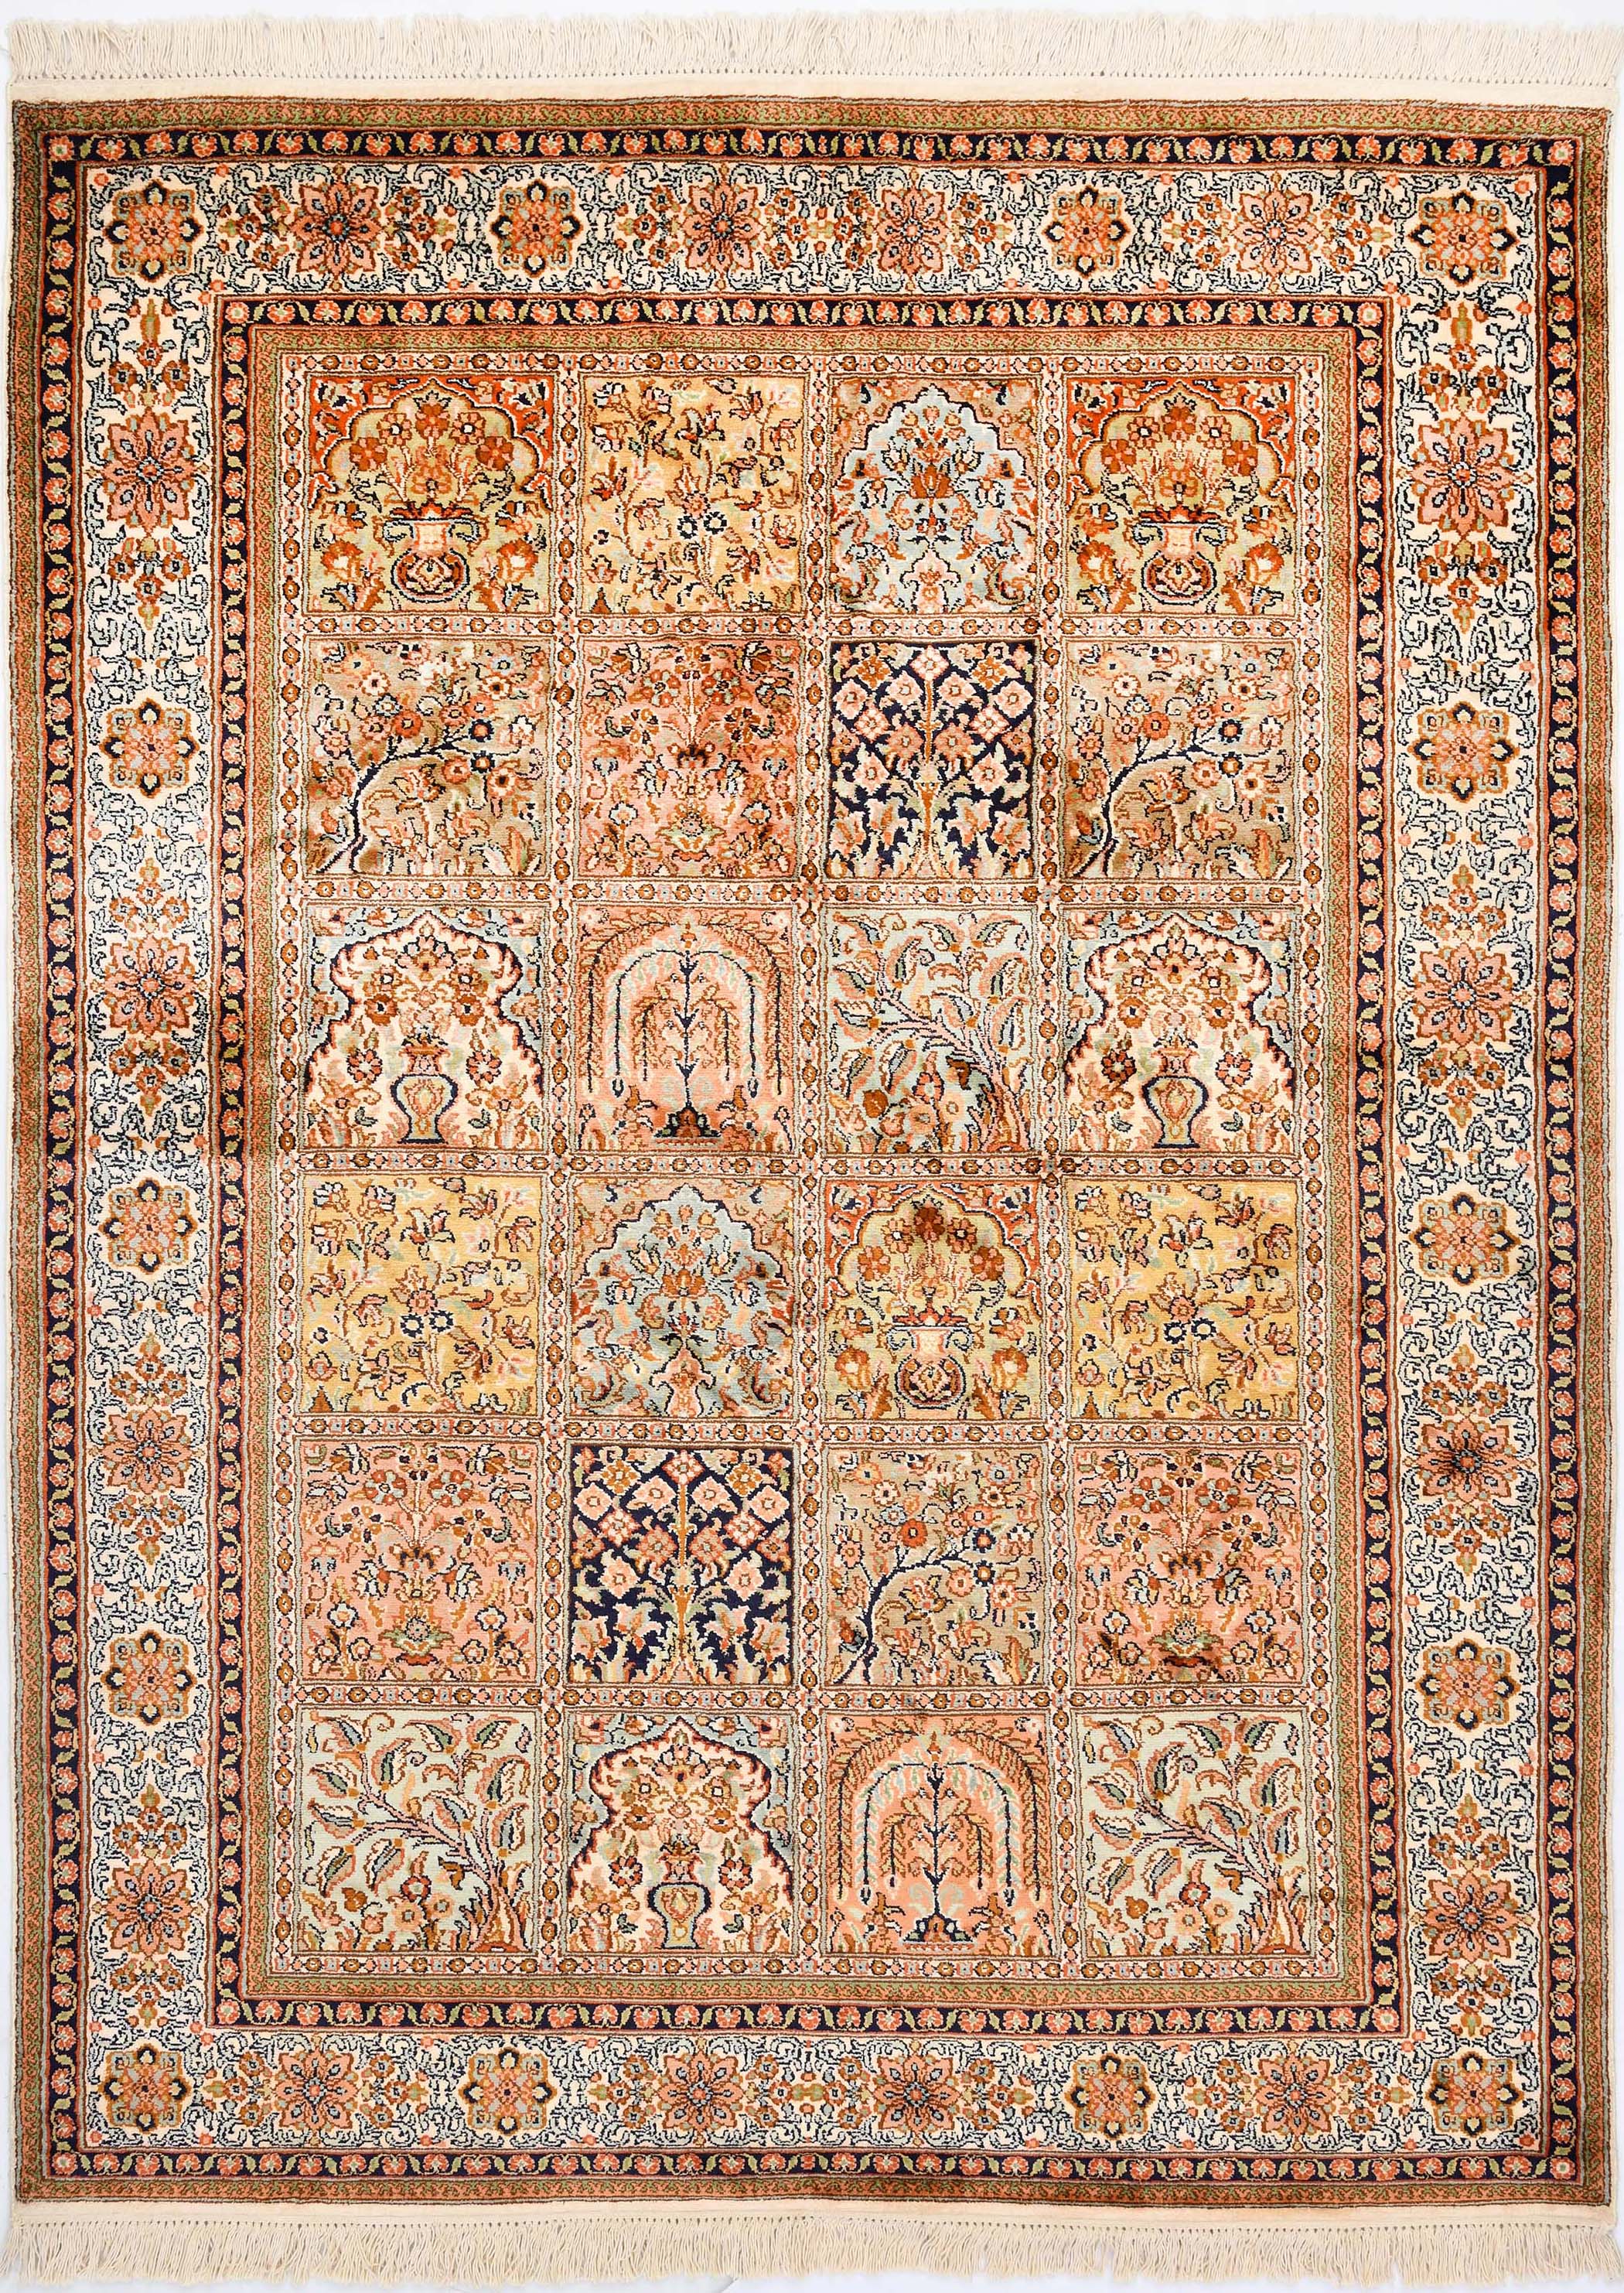 Saraswati Global- Area Rugs & Carpets  Manufacture Carpets Suppliers Of  Floor Rugs : product-detail